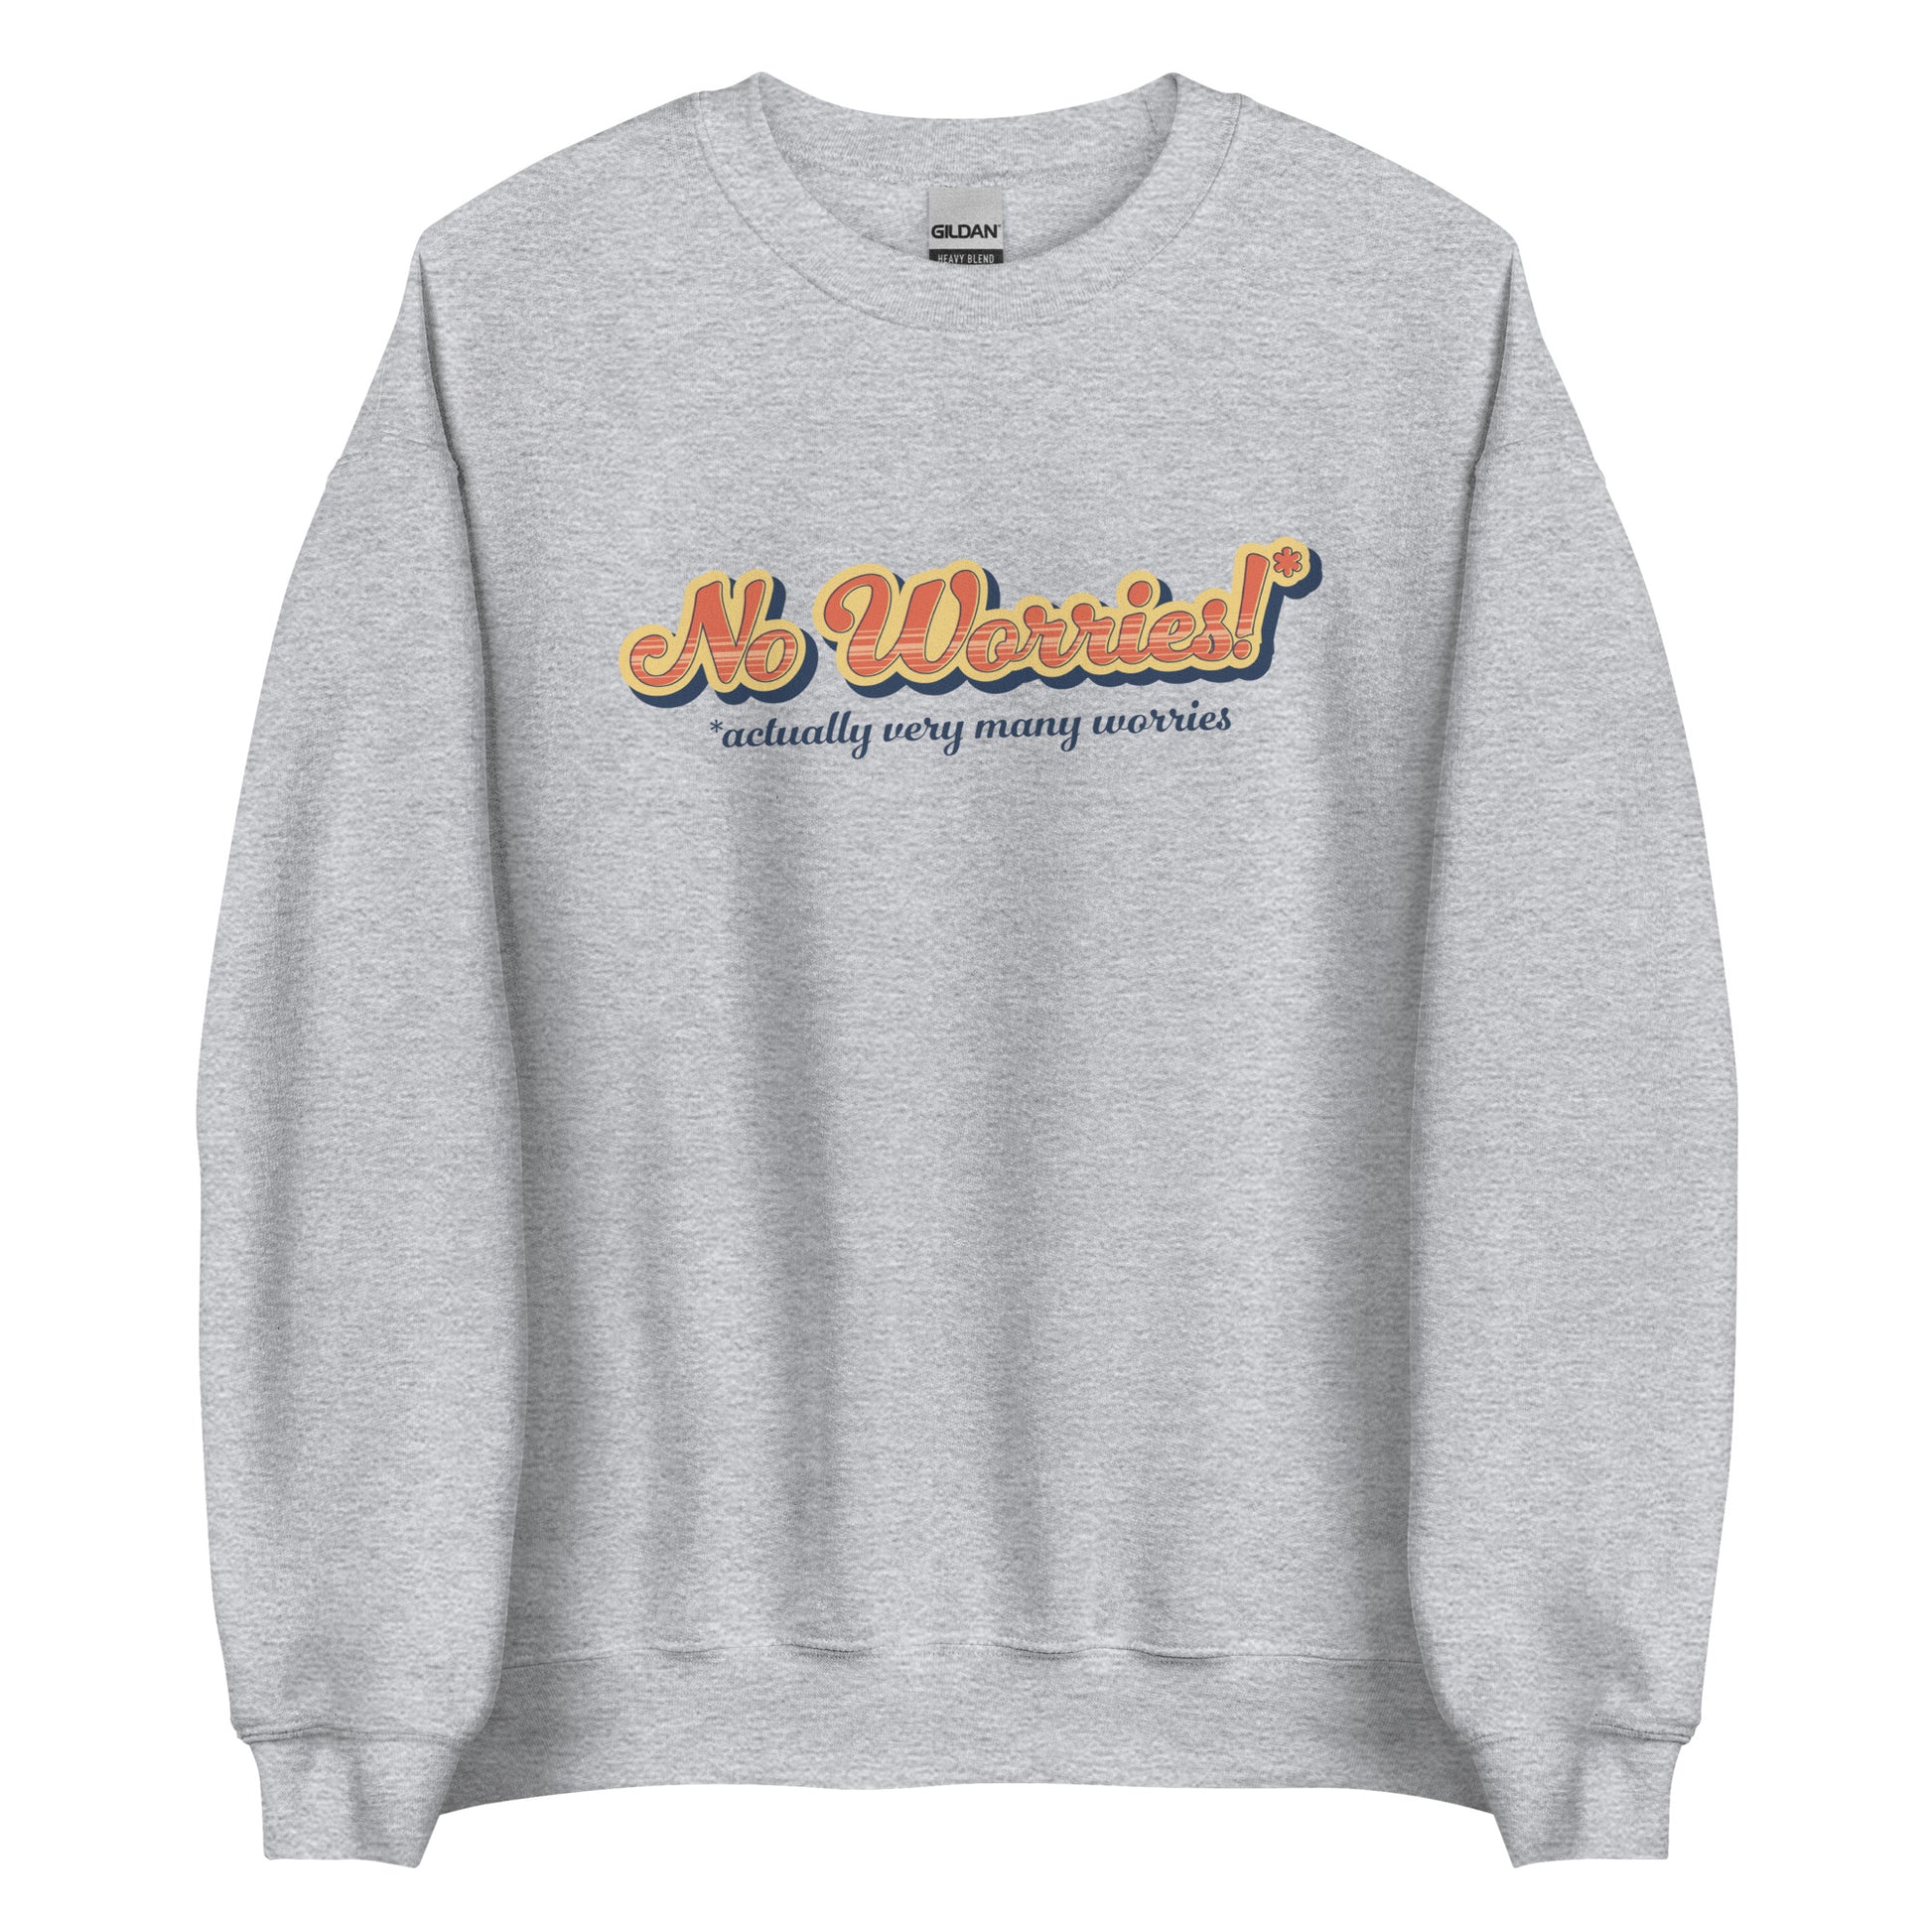 A light grey crewneck sweatshirt featuring vintage-style text that reads "No worries!* *actually very many worries"